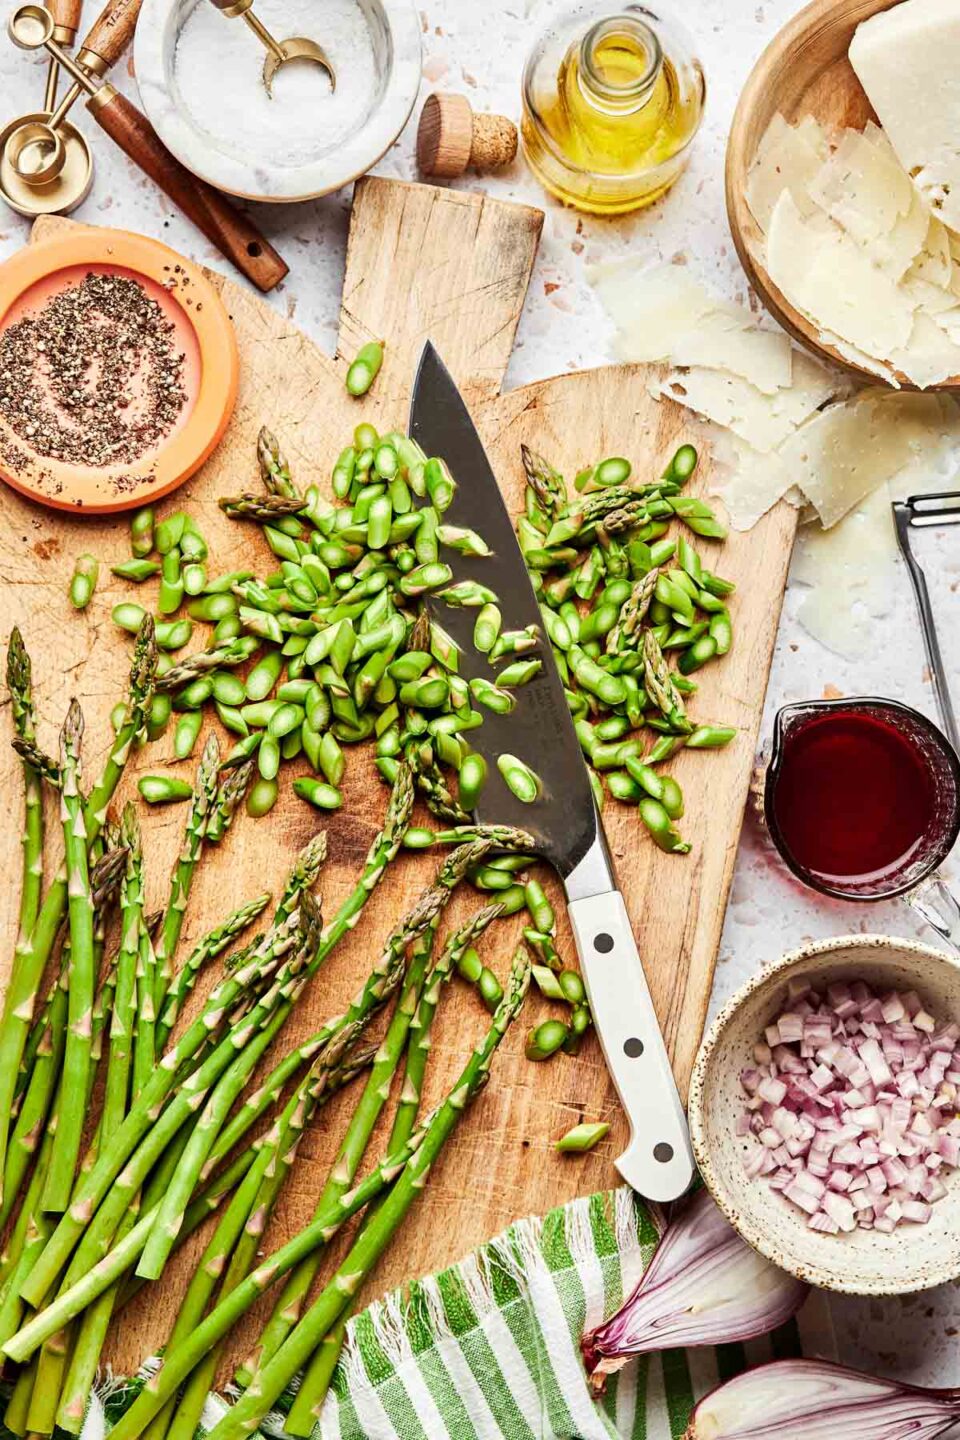 An overhead shot of ingredients displayed on a wooden board and a white textured surface: whole and chopped asparagus, shallots, pecorino cheese, red wine vinegar, olive oil, salt and pepper.